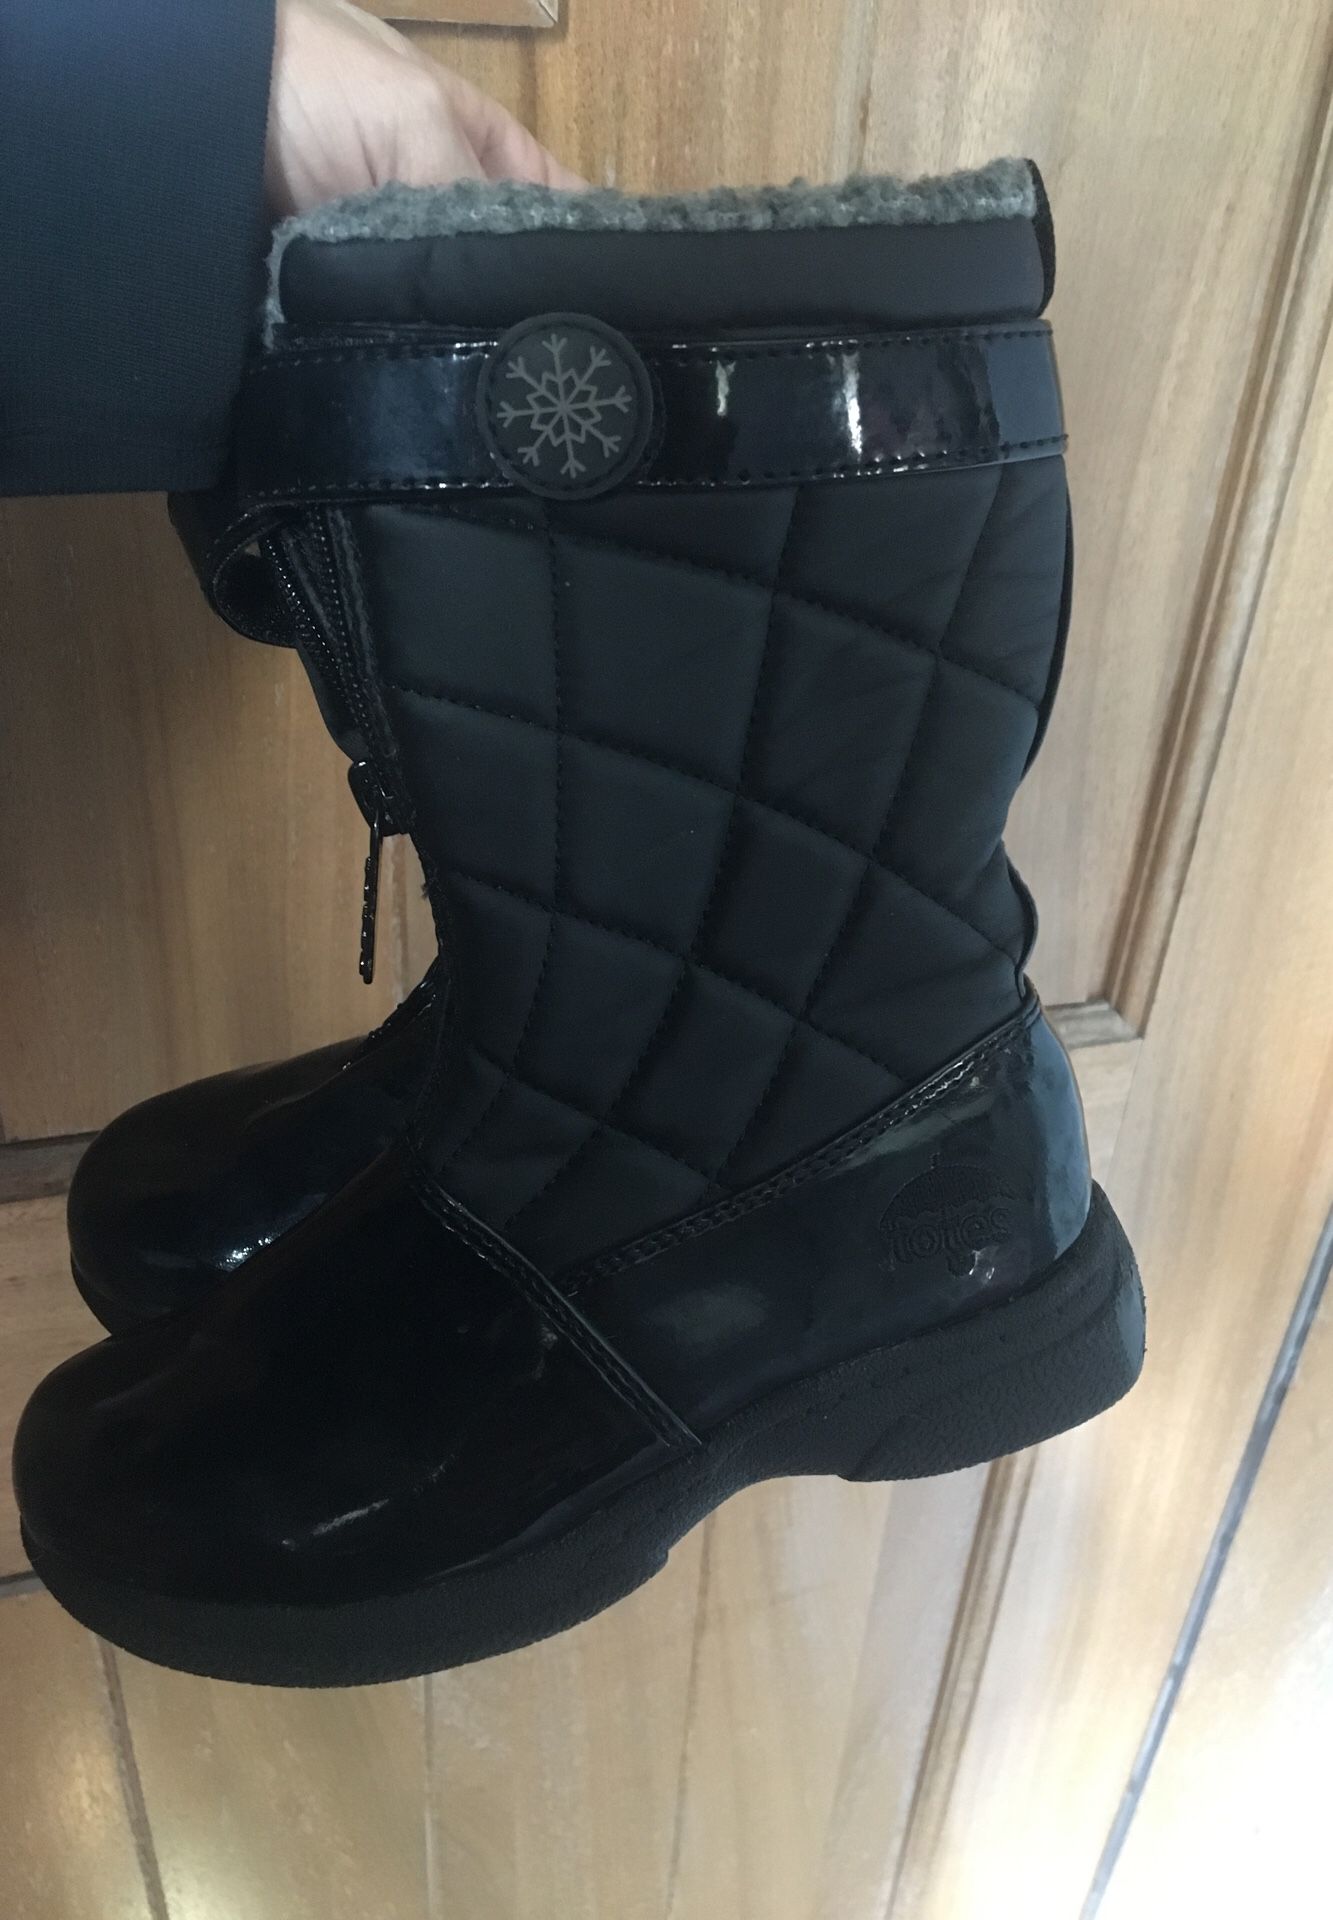 Girls Size 11 Totes Winter/Rain Boots Like New